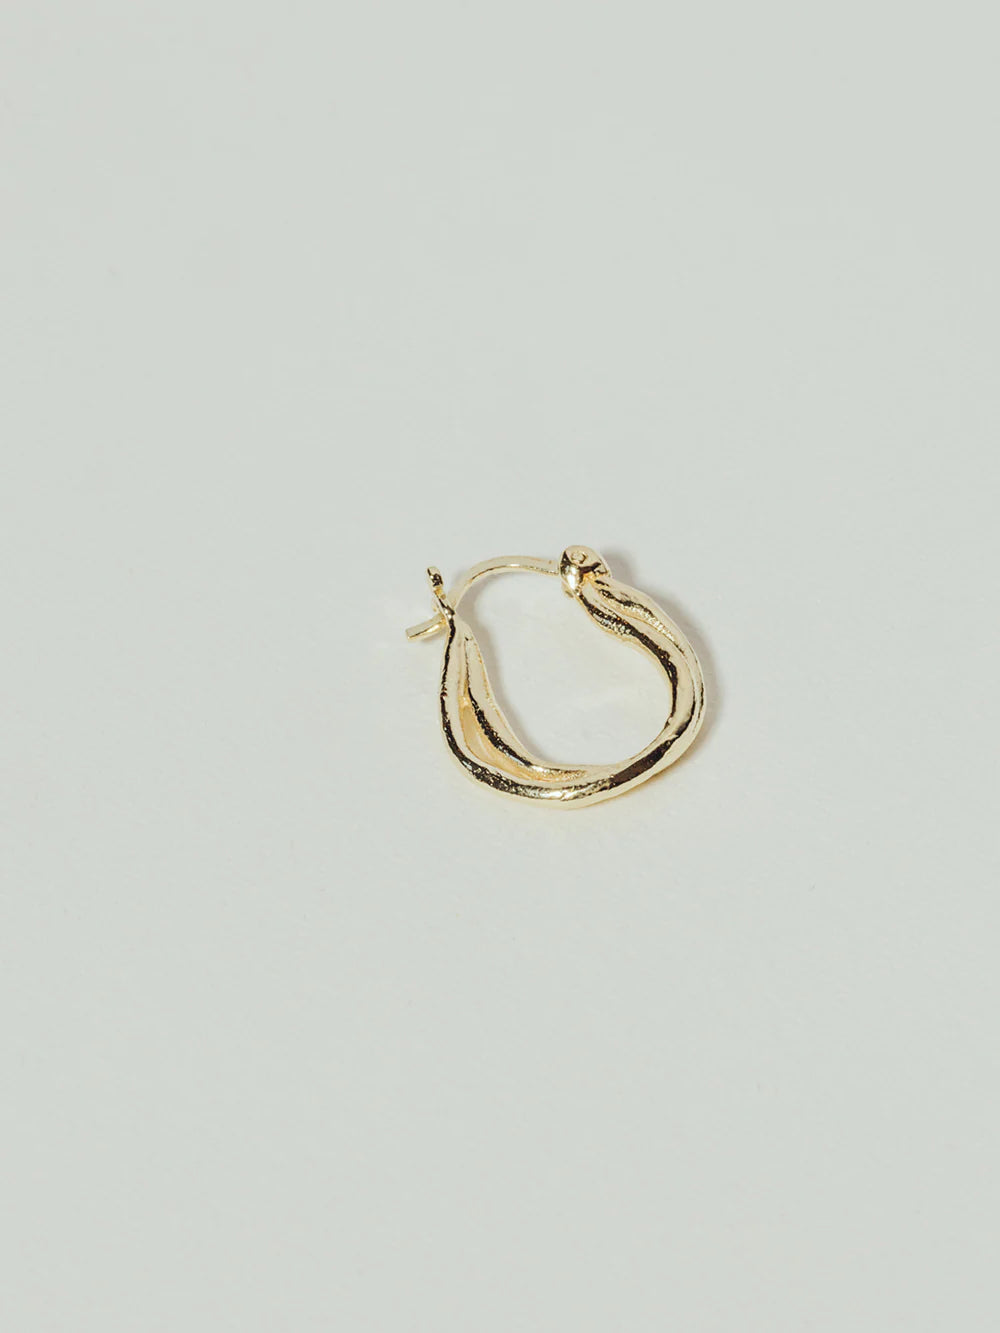 OTHER WAY earring GP 14K